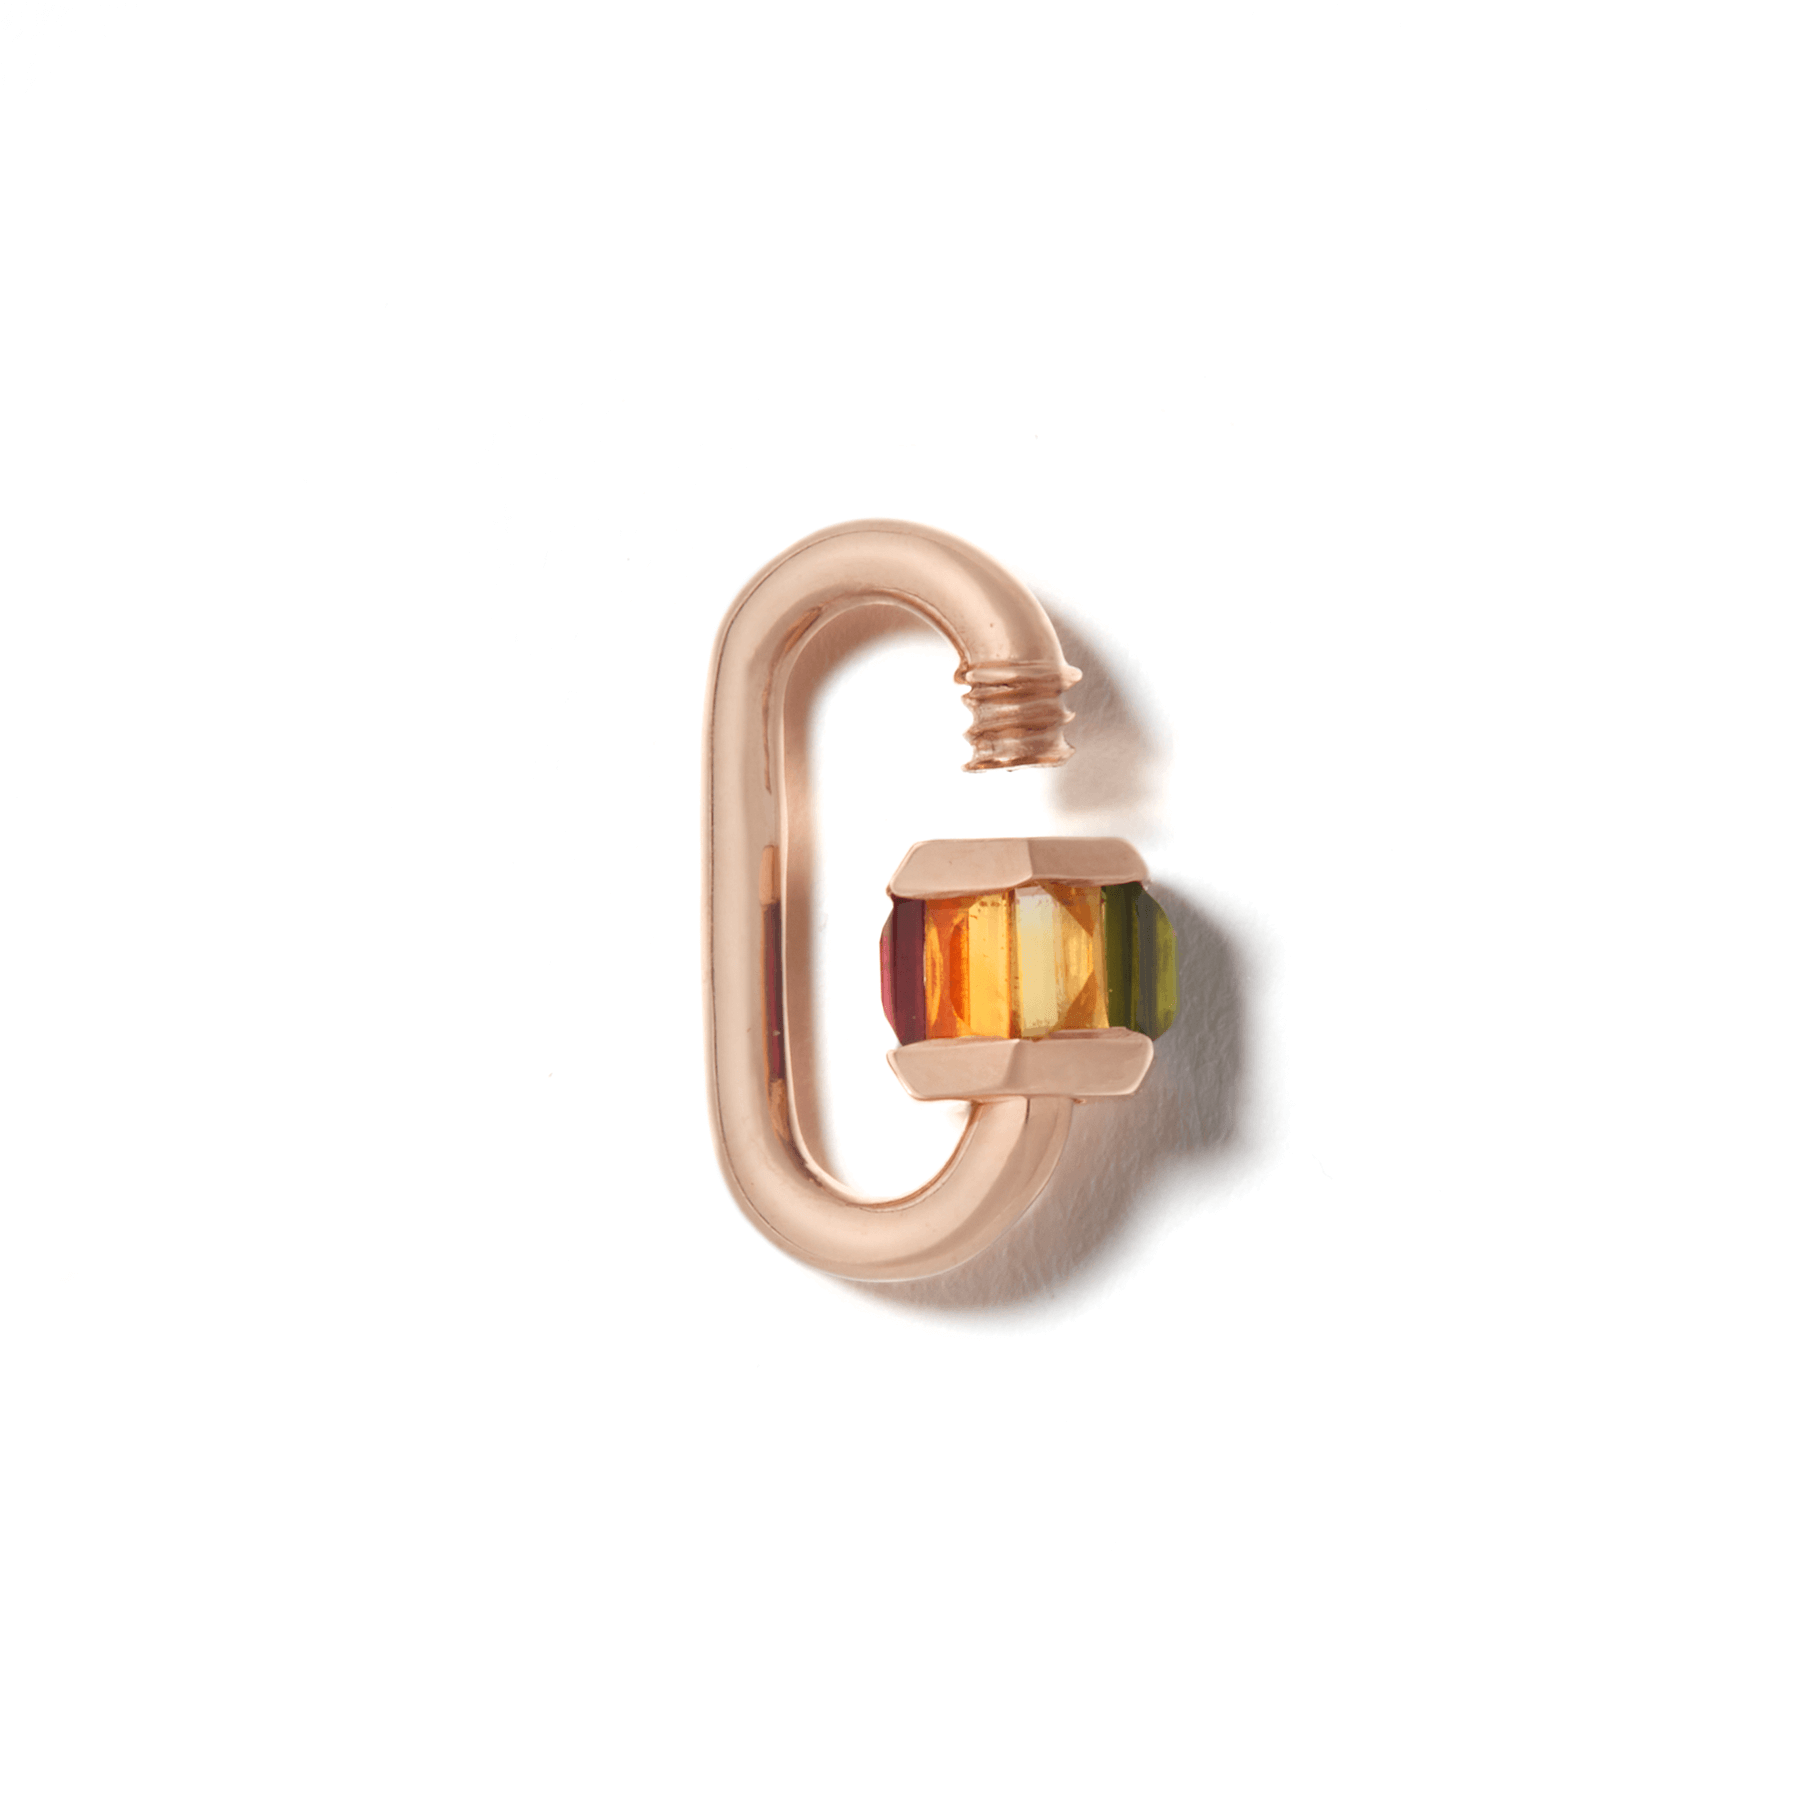 Rose gold roygbiv jewelry lock with open clasp against white backdrop 